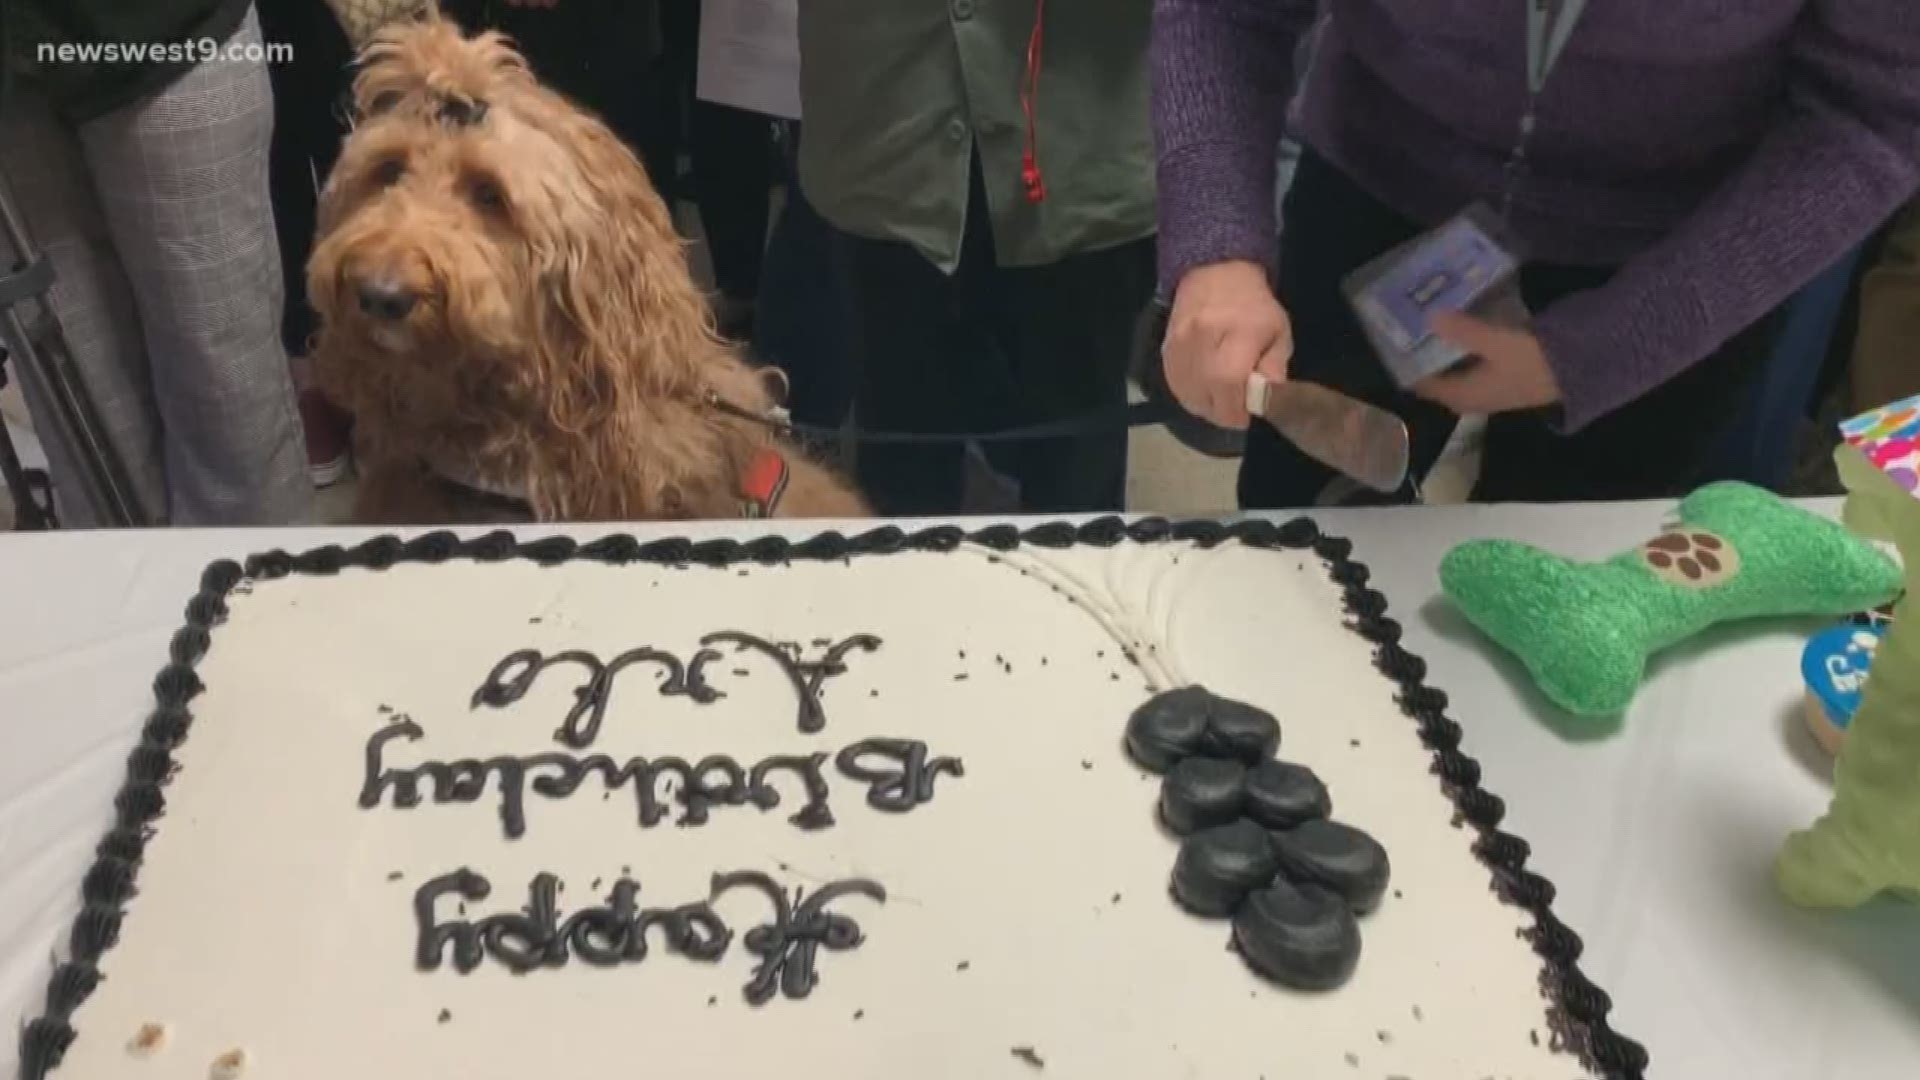 Permian High School's therapy dog, Arlo celebrated his birthday with treats for both humans and fur friends.